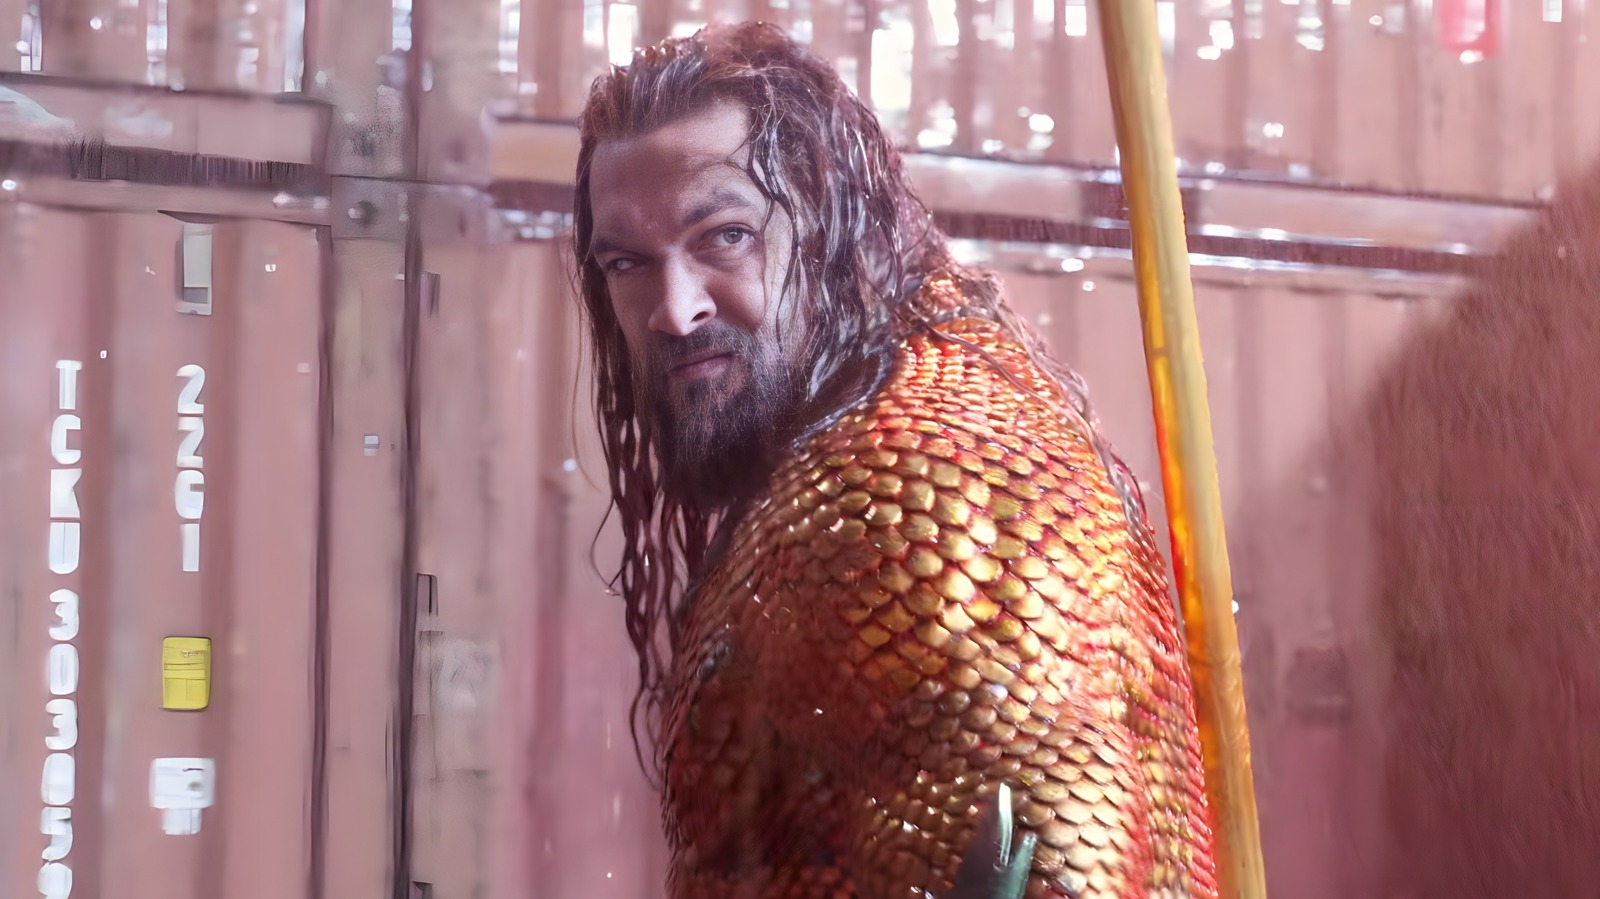 Aquaman 2 Showed Arthur’s New Blue Suit In Action – Here’s What It Can Really Do